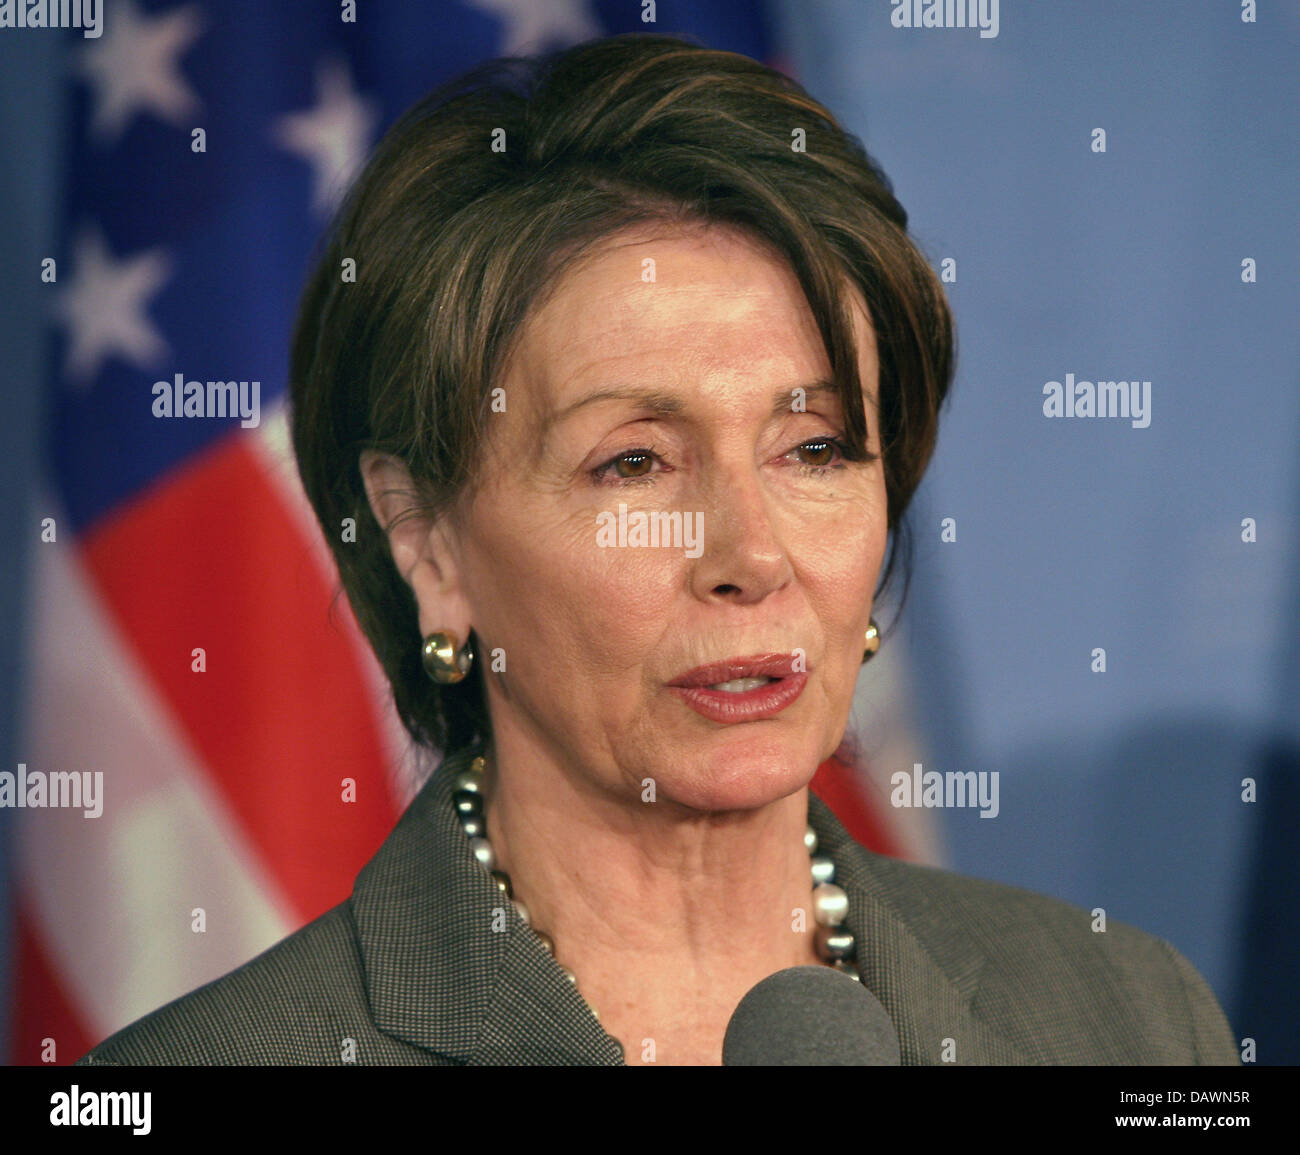 Speaker of the US Congress Nancy Pelosi speaks at a press conference in Berlin, Germany, 28 May 2007. Pelosi is on a two-day visit to Germany and meets with German Chancellor Angela Merkel on 29 May. Photo: Stephanie Pilick Stock Photo